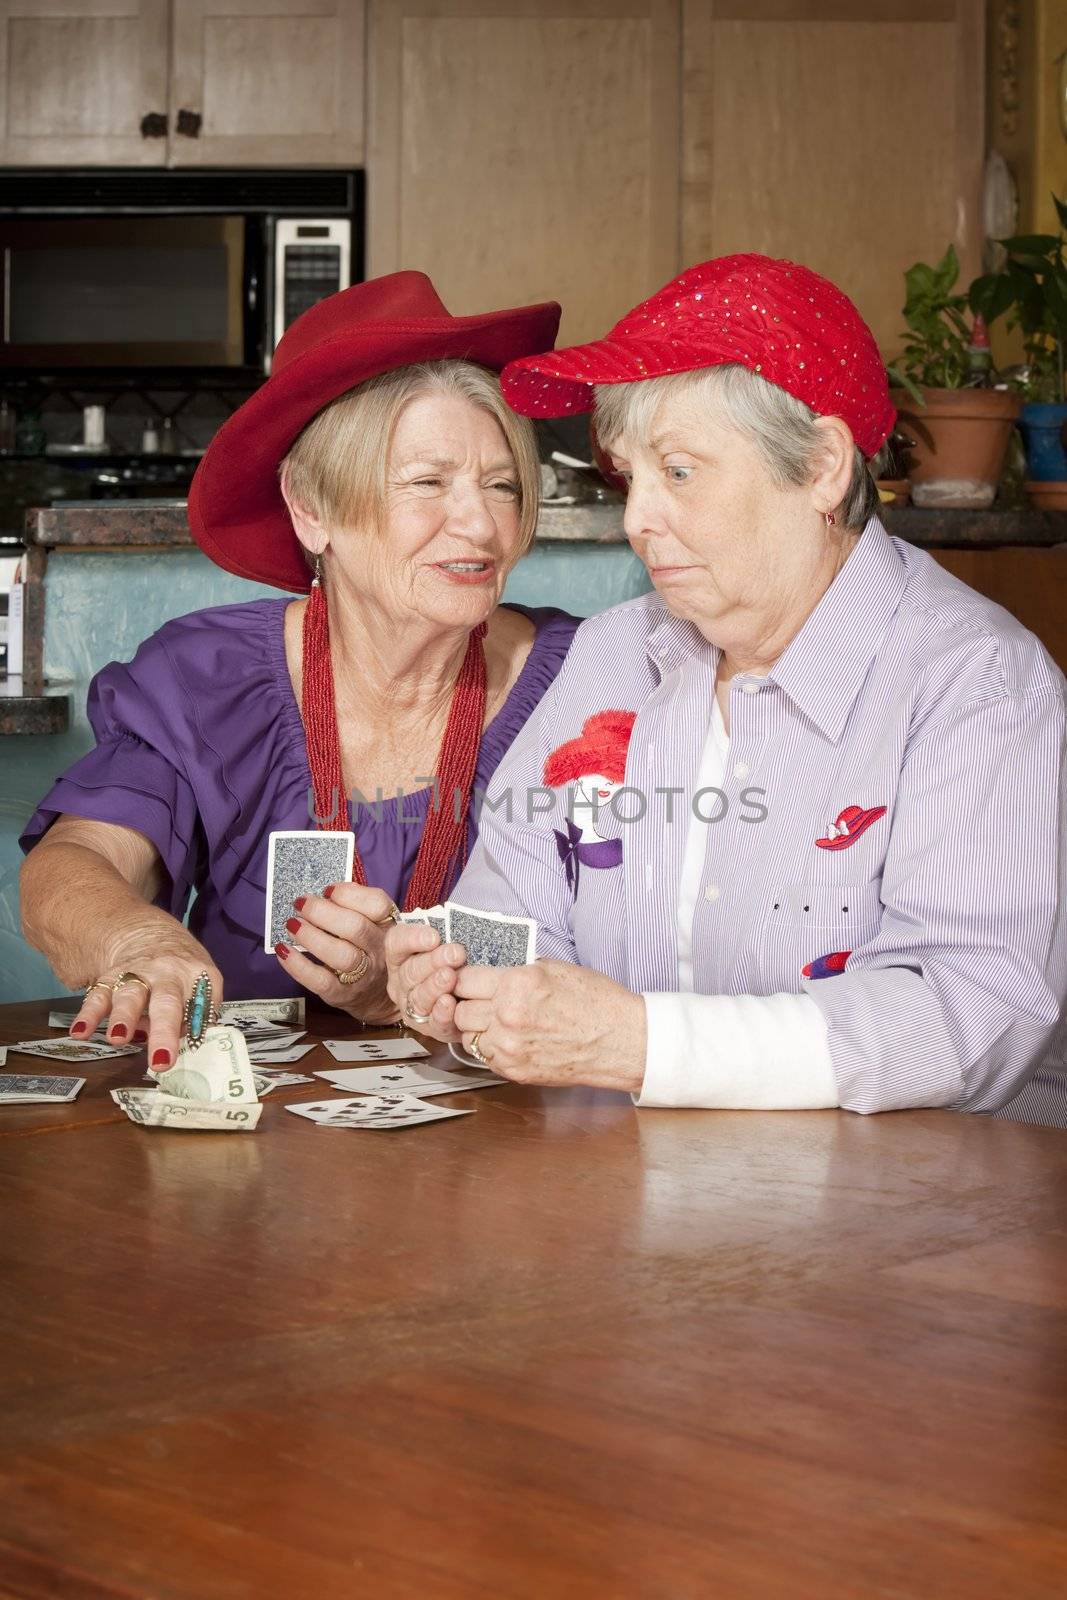 Ladies wearing red hats playing a hand of cards